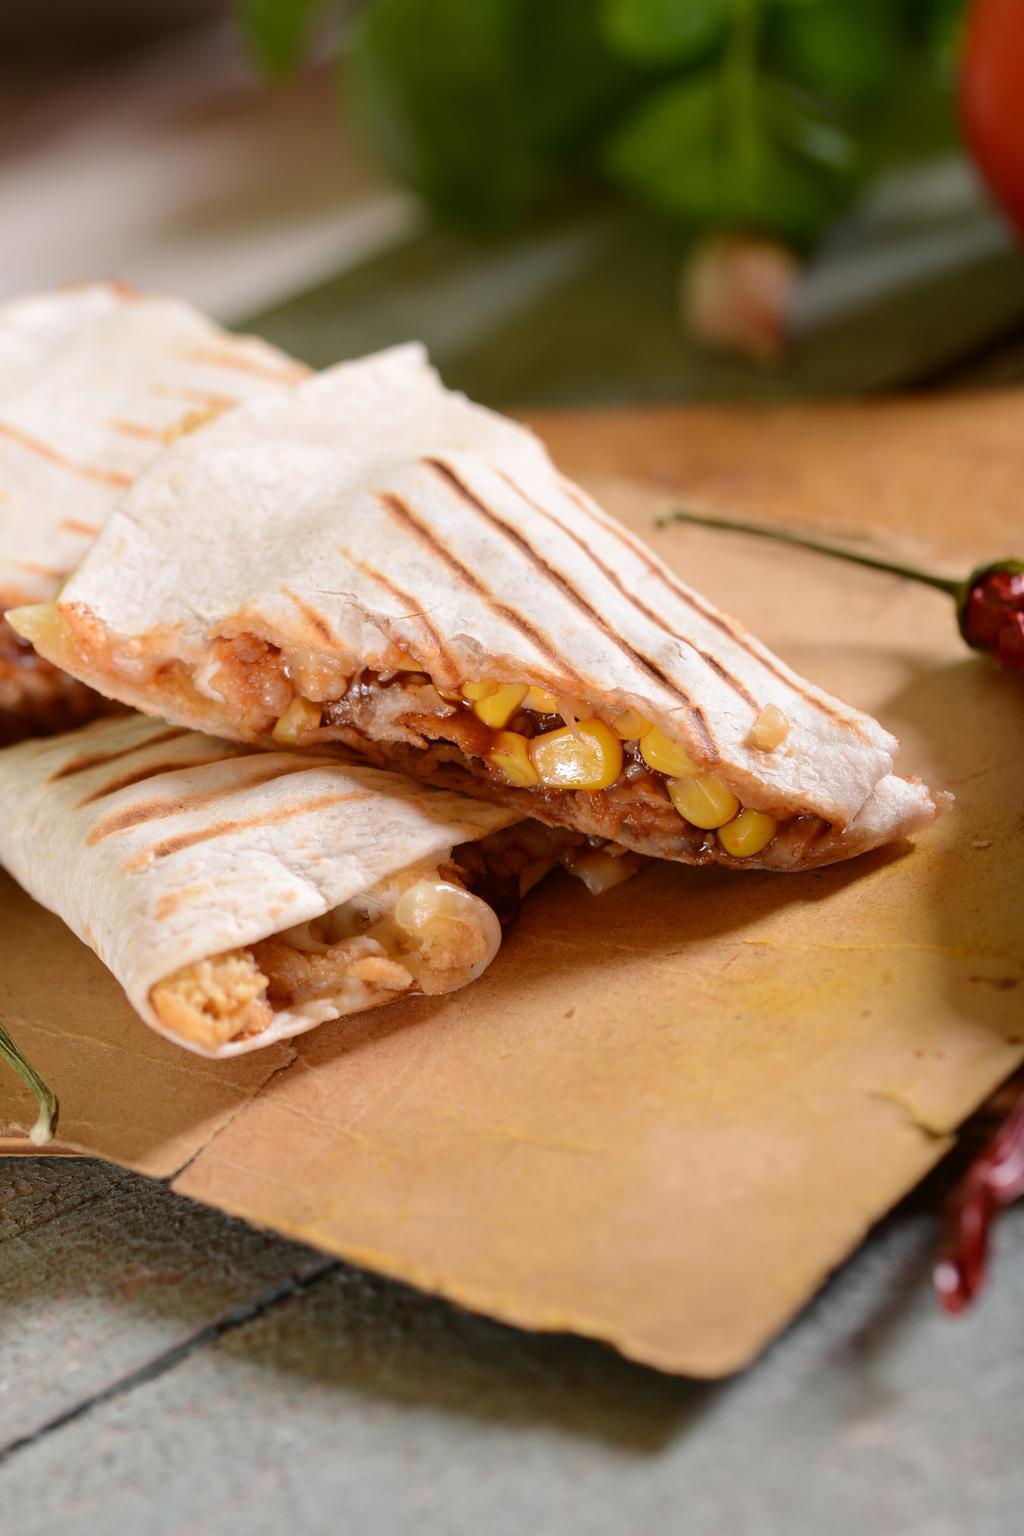 FEATURED RECIPE: Roasted Corn and Caramelized Onion Quesadillas INGREDIENTS 2 tablespoons Crisco Pure Vegetable Oil 1 large red onion, peeled and cut from stem to root into thin strips 2 ½ cups fresh